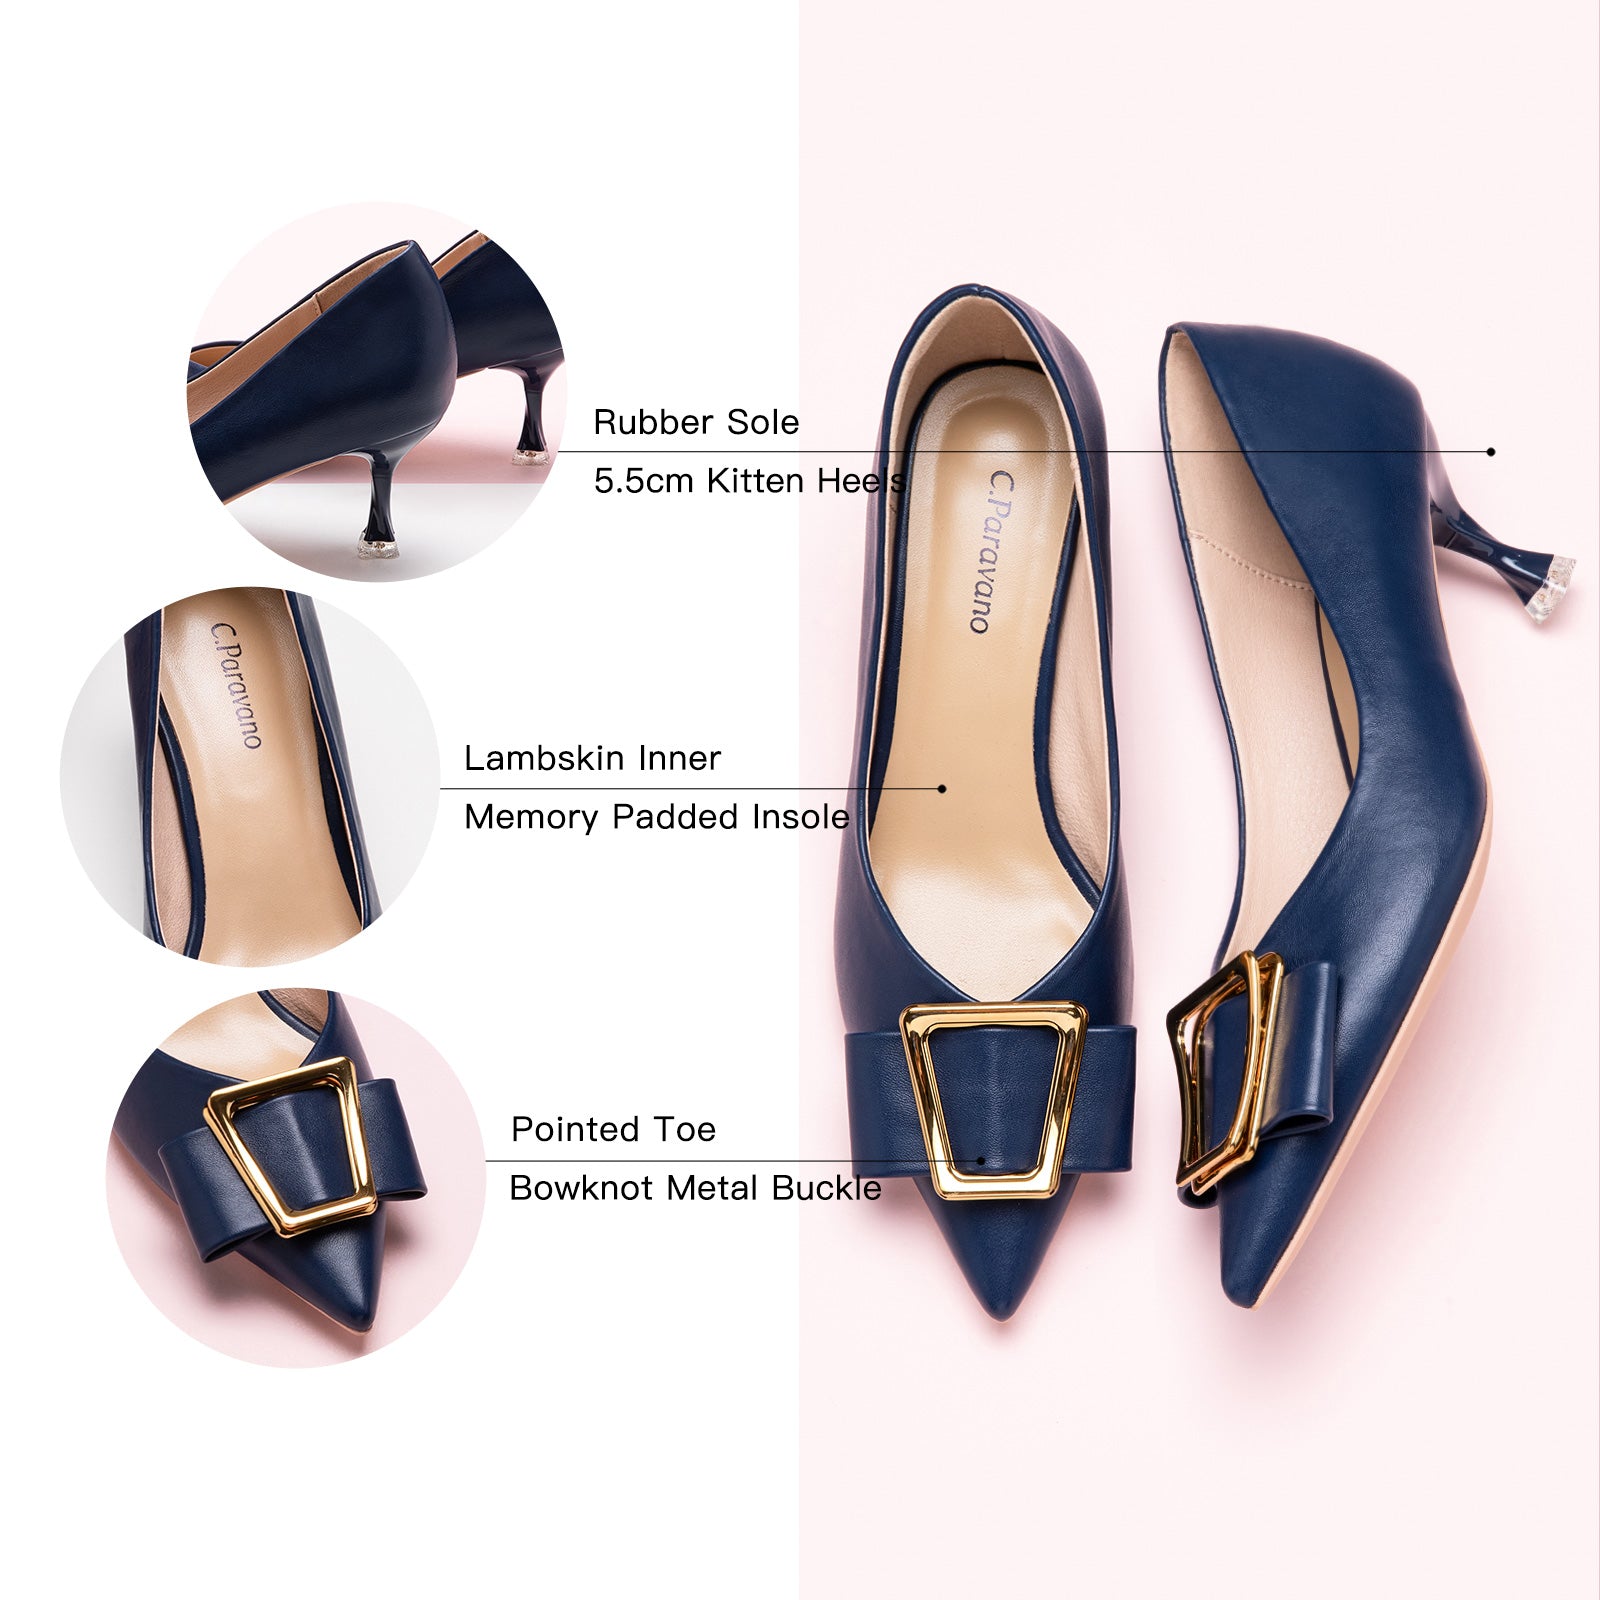 Geometric Navy Kitten Heel Pumps, providing a rich and stylish touch to your ensemble